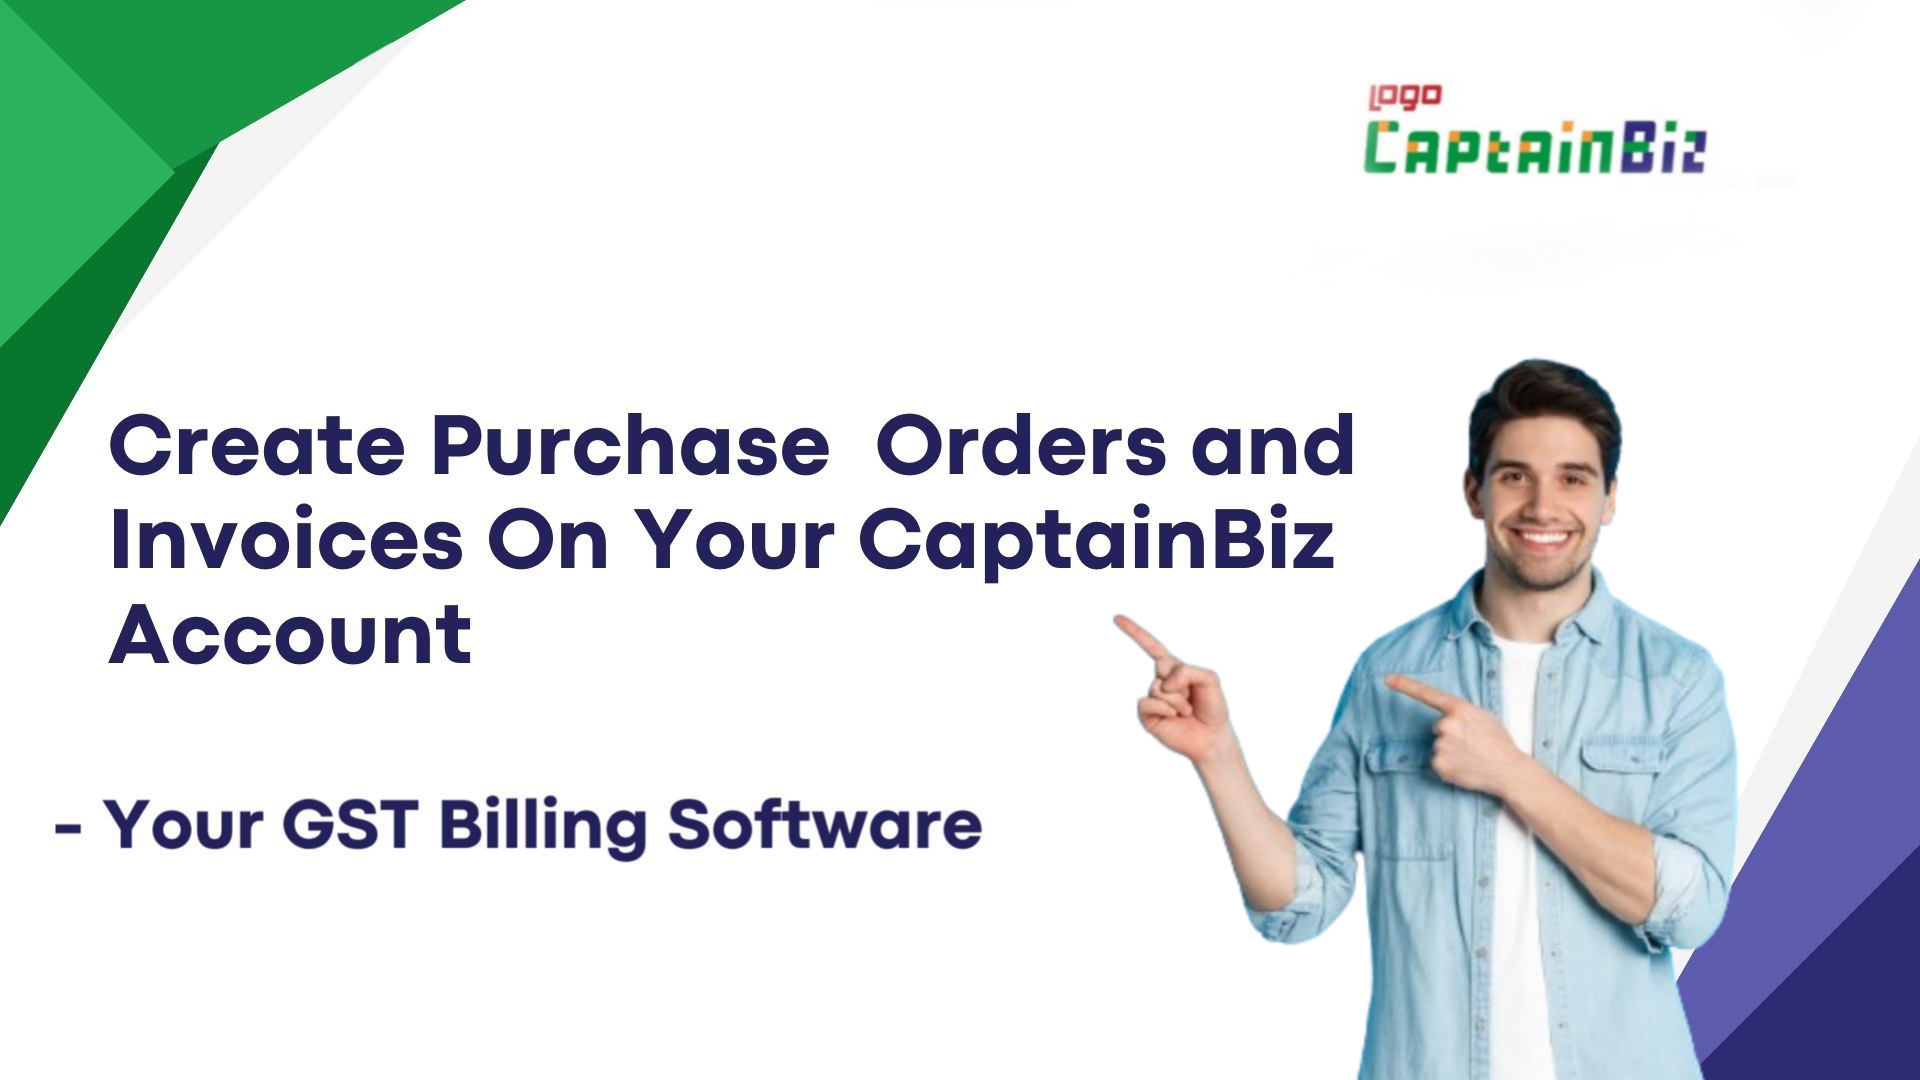 Process of Creating Purchase Orders and Invoices With CaptainBiz